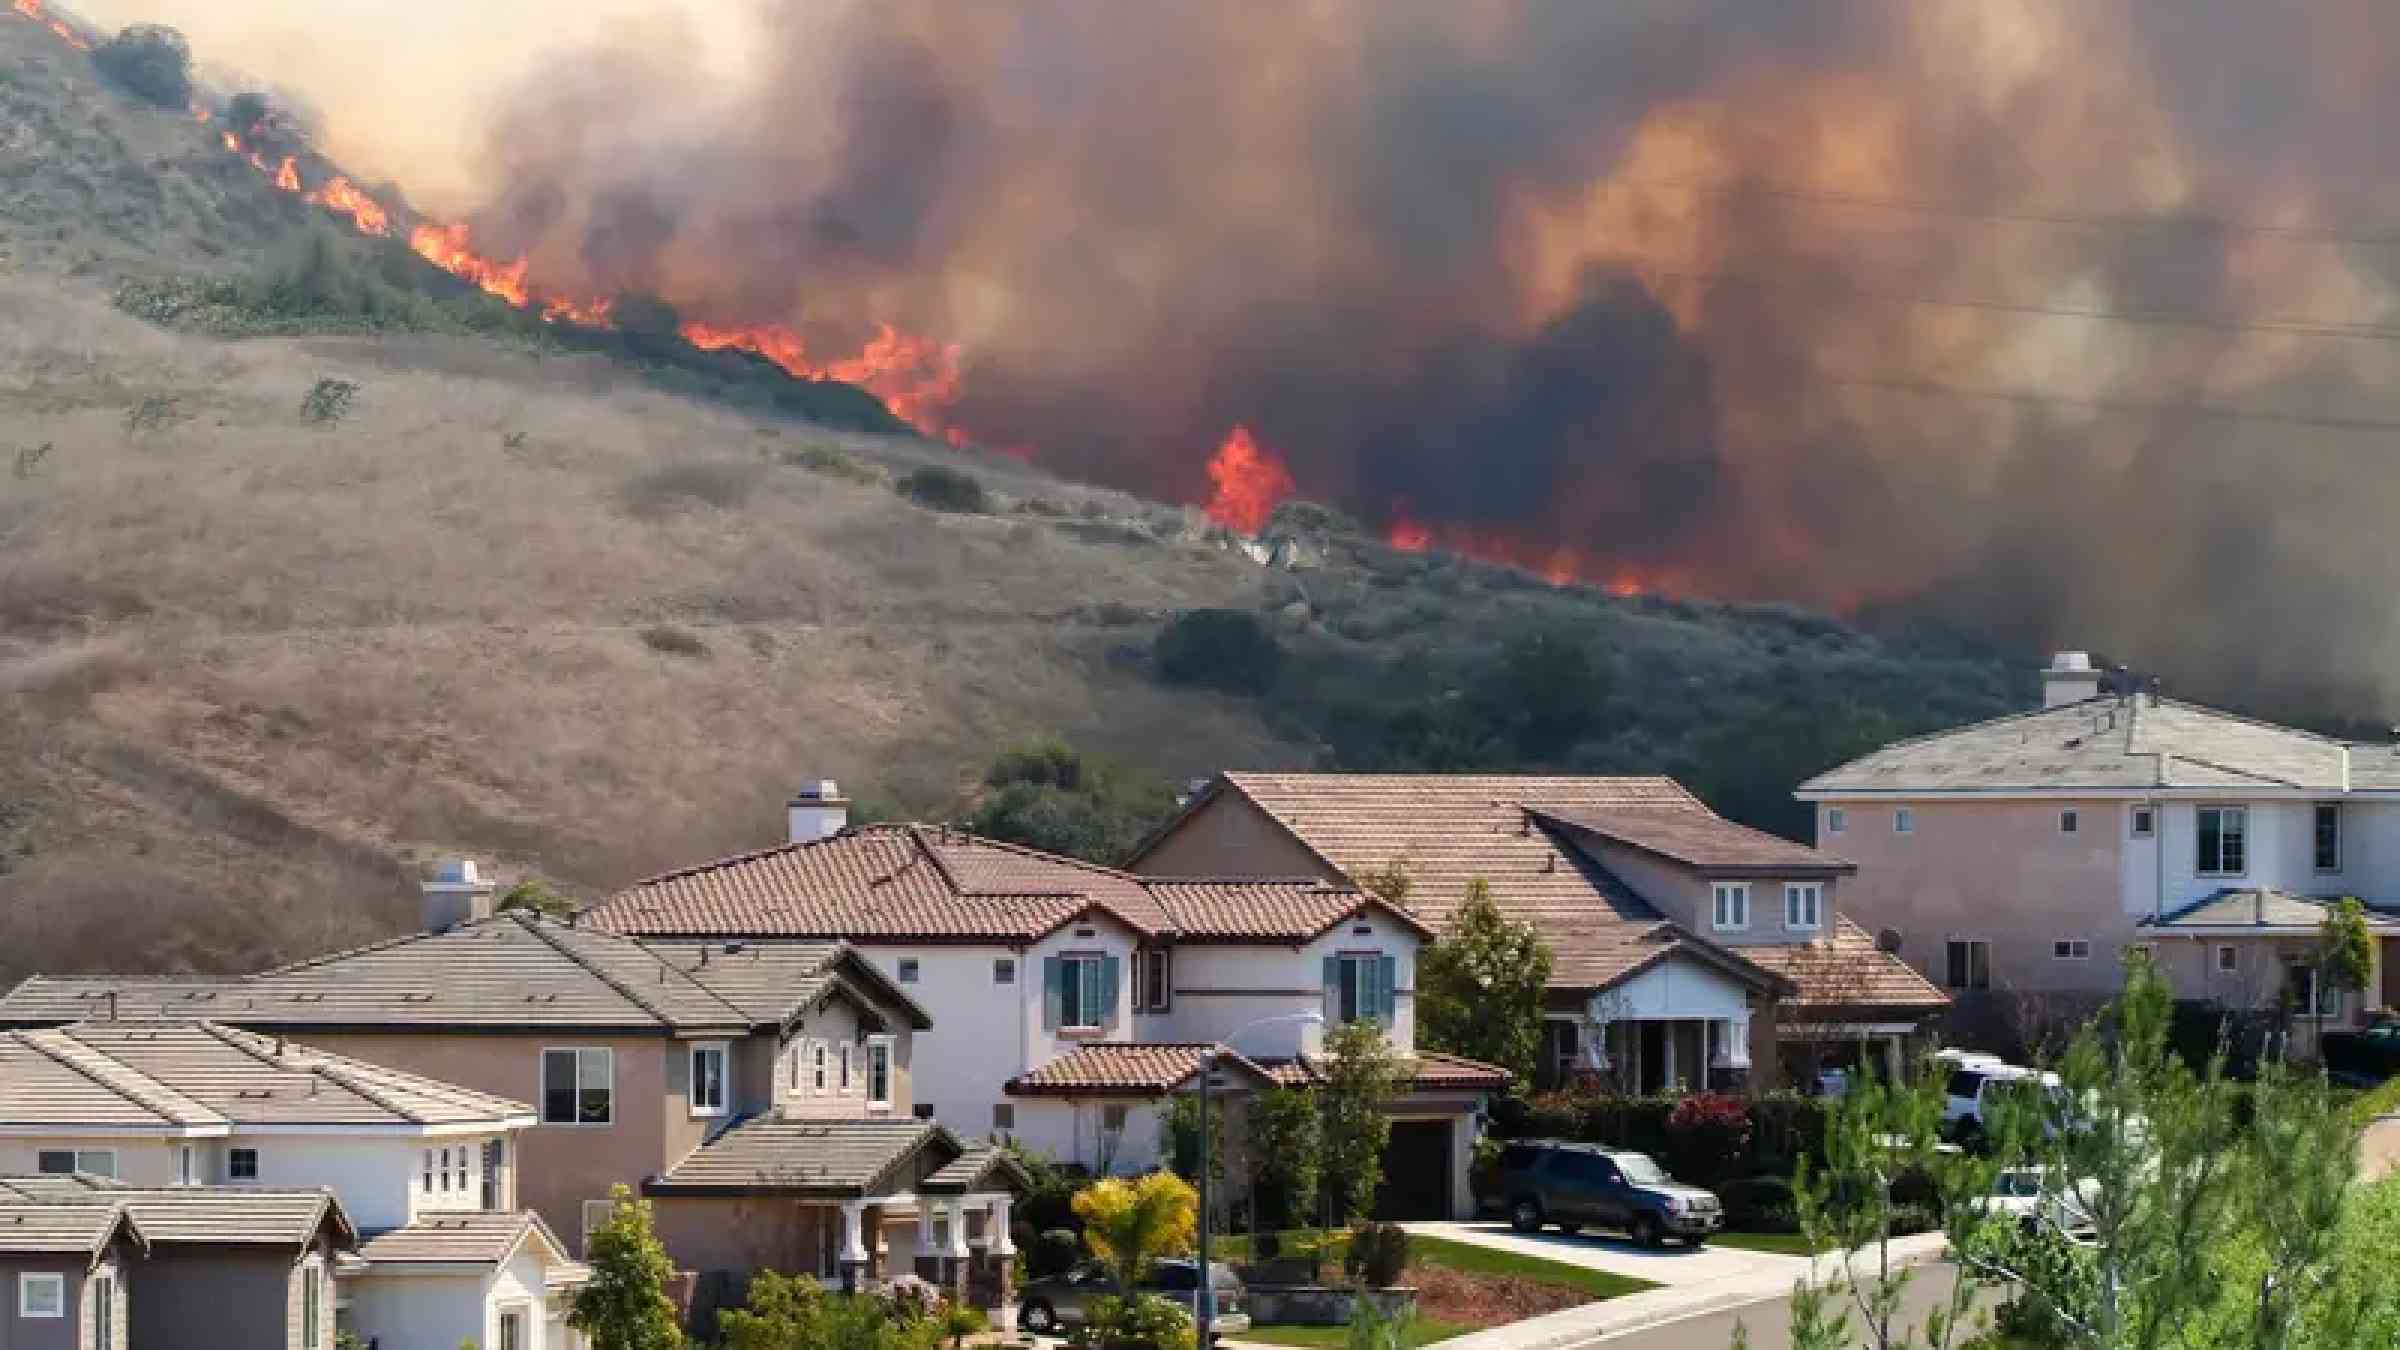 Wildfire raging near houses